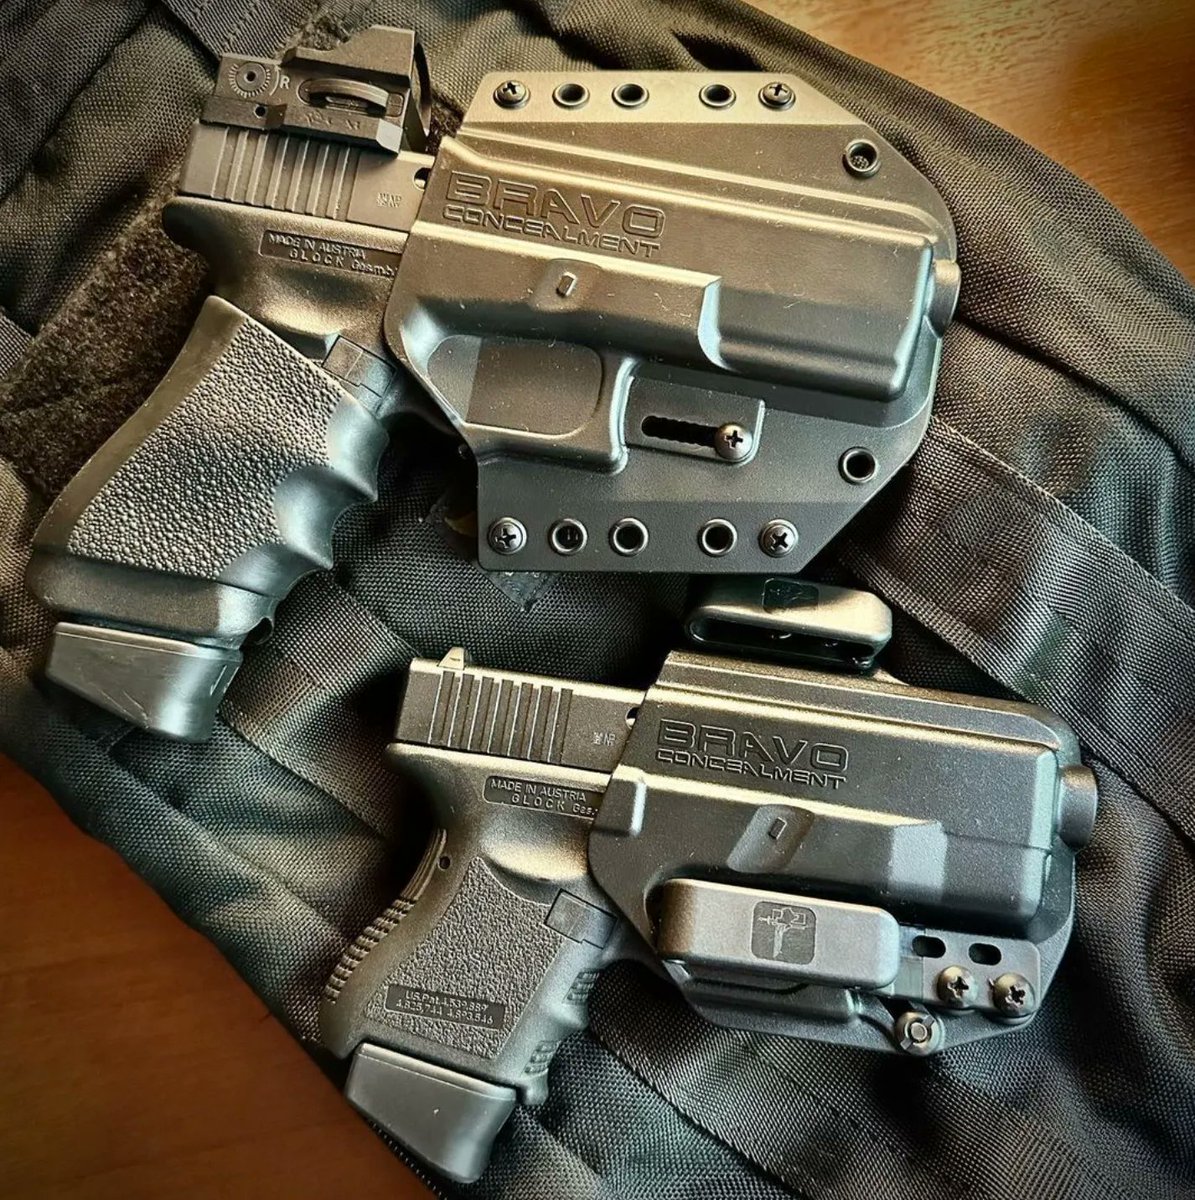 IWB or OWB? Which do you prefer? 

#bravoconcealment
#bravoholsters #appendixcarry
#gunsdaily #everydaycarry
#holster #concealedcarey
#dvc #willyigleisa #ninja #training #tactical #specialoperations #pewpew #gunsofinstagram #firearmsinstructor #volturacademy #edc #ccw